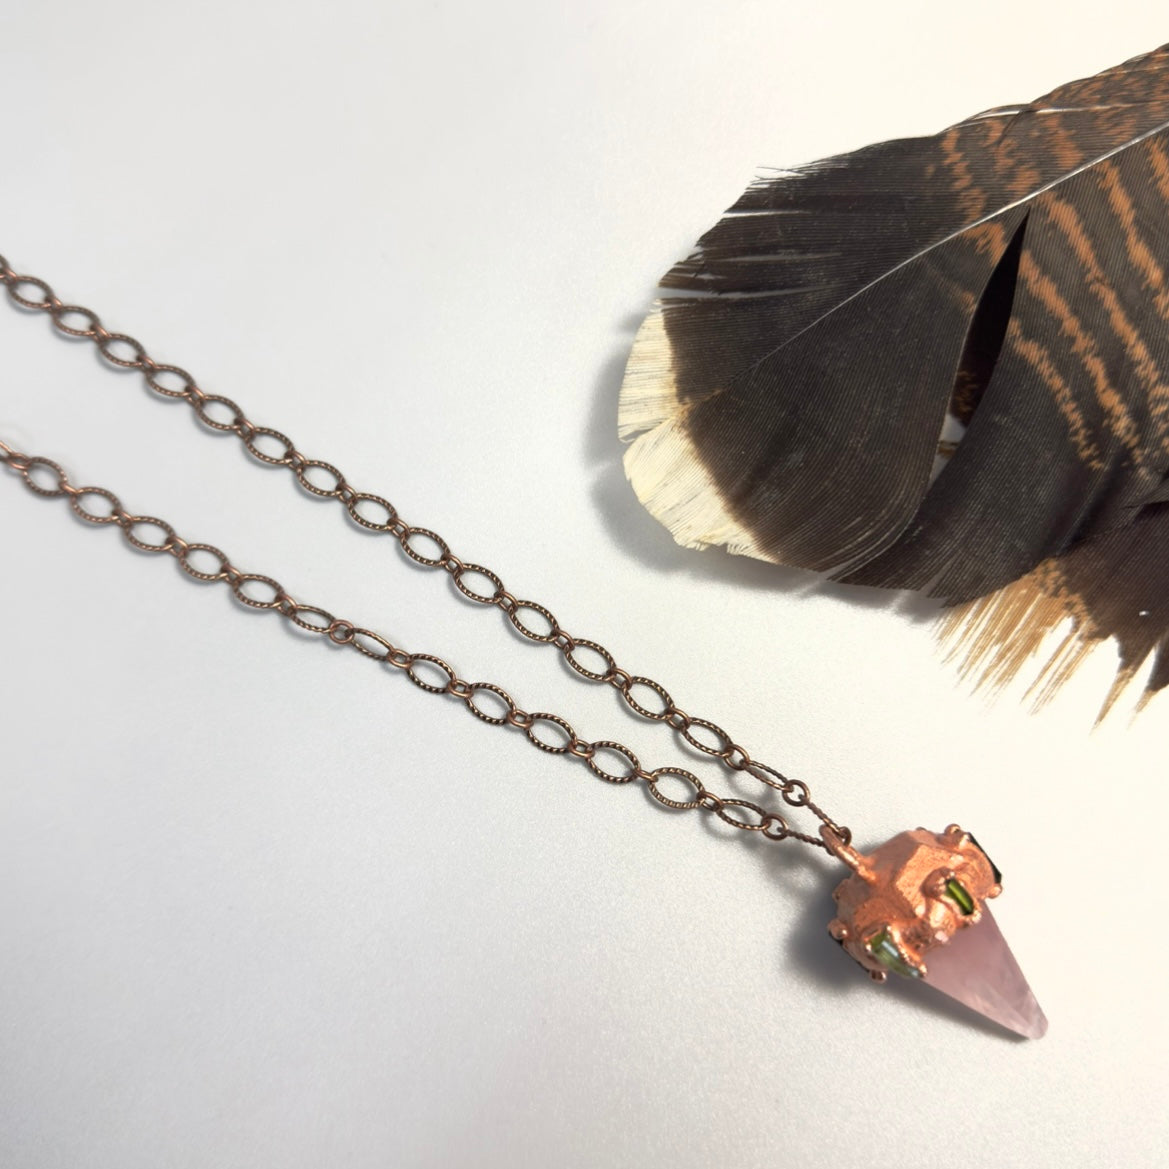 Pendulum crystal necklace with long copper chain